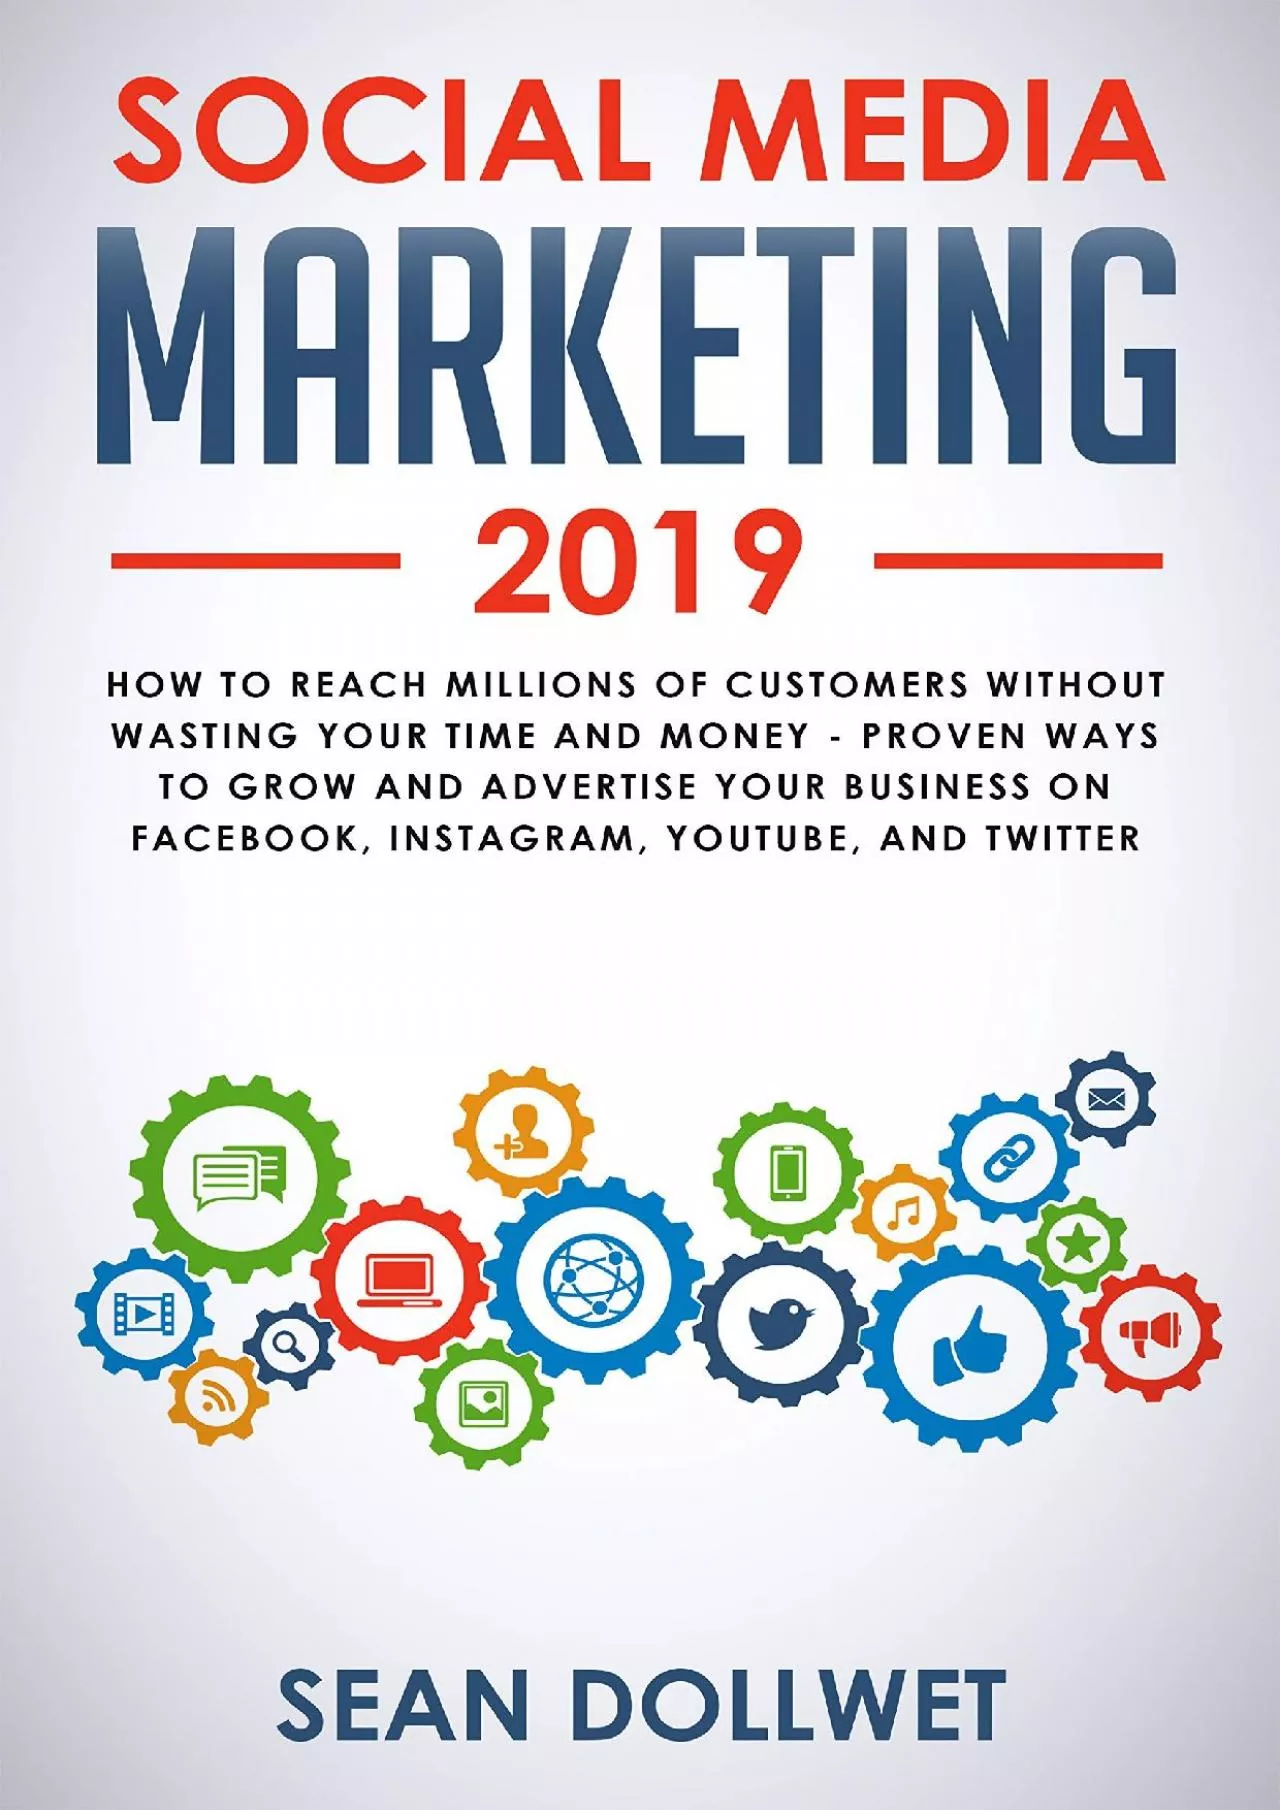 Social Media Marketing 2019 How to Reach Millions of Customers Without Wasting Your Time